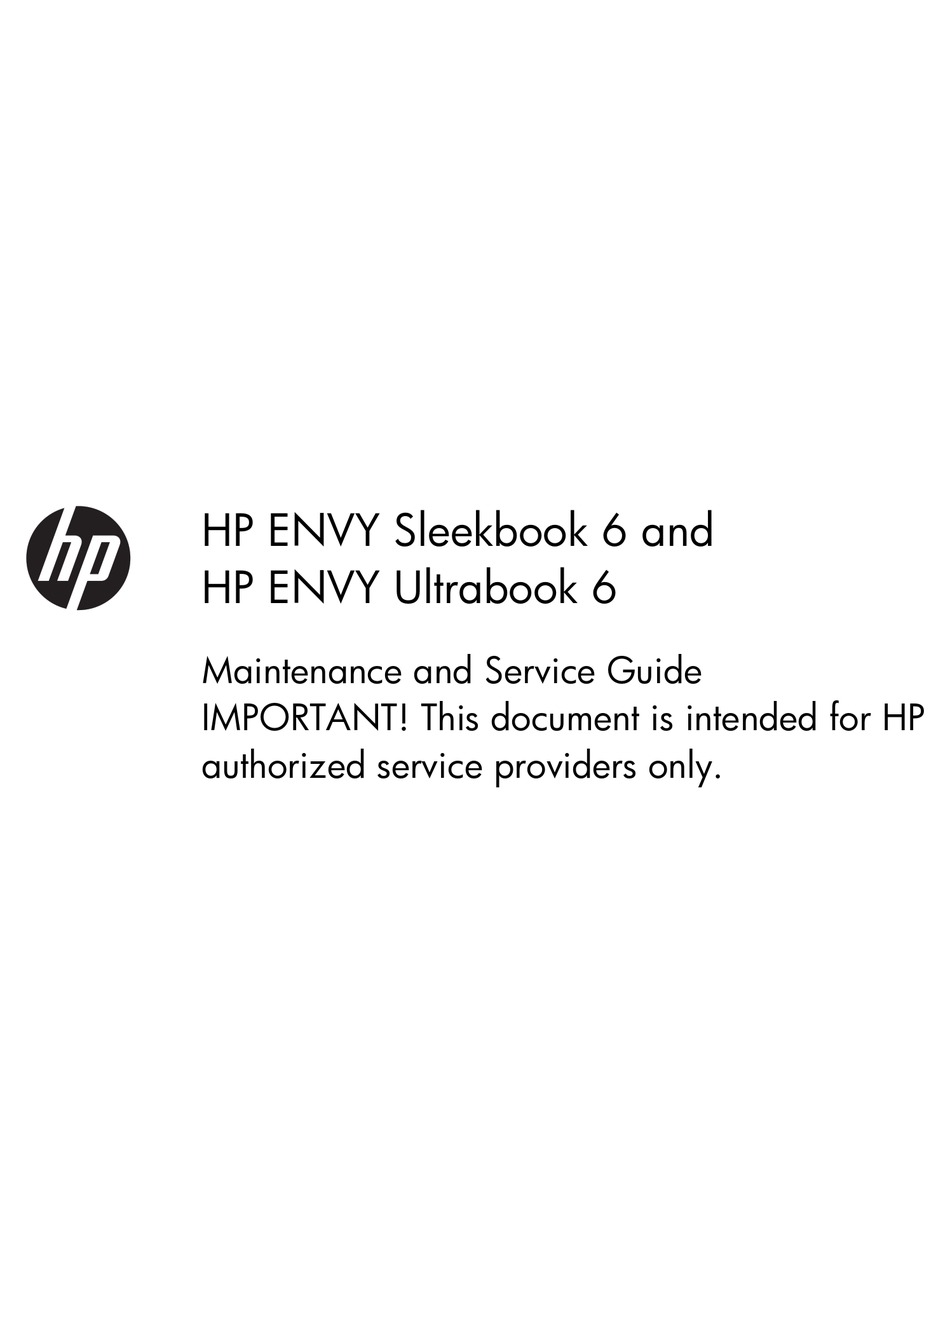 hp 3d driveguard software wont install on hp envy